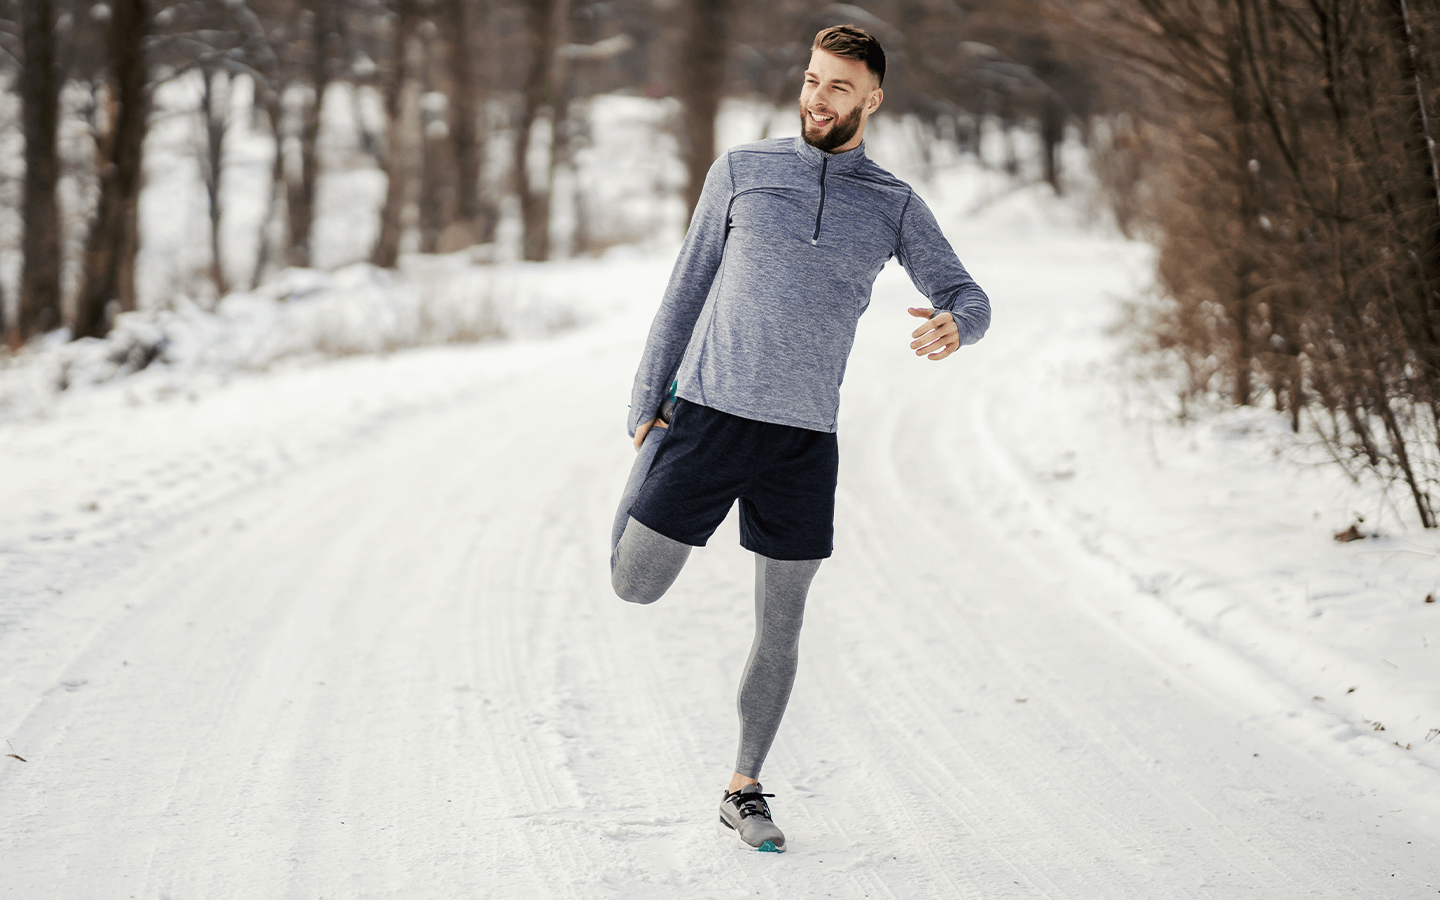 The 7 Best Men's Thermal Compression Shirts for Winter Workouts